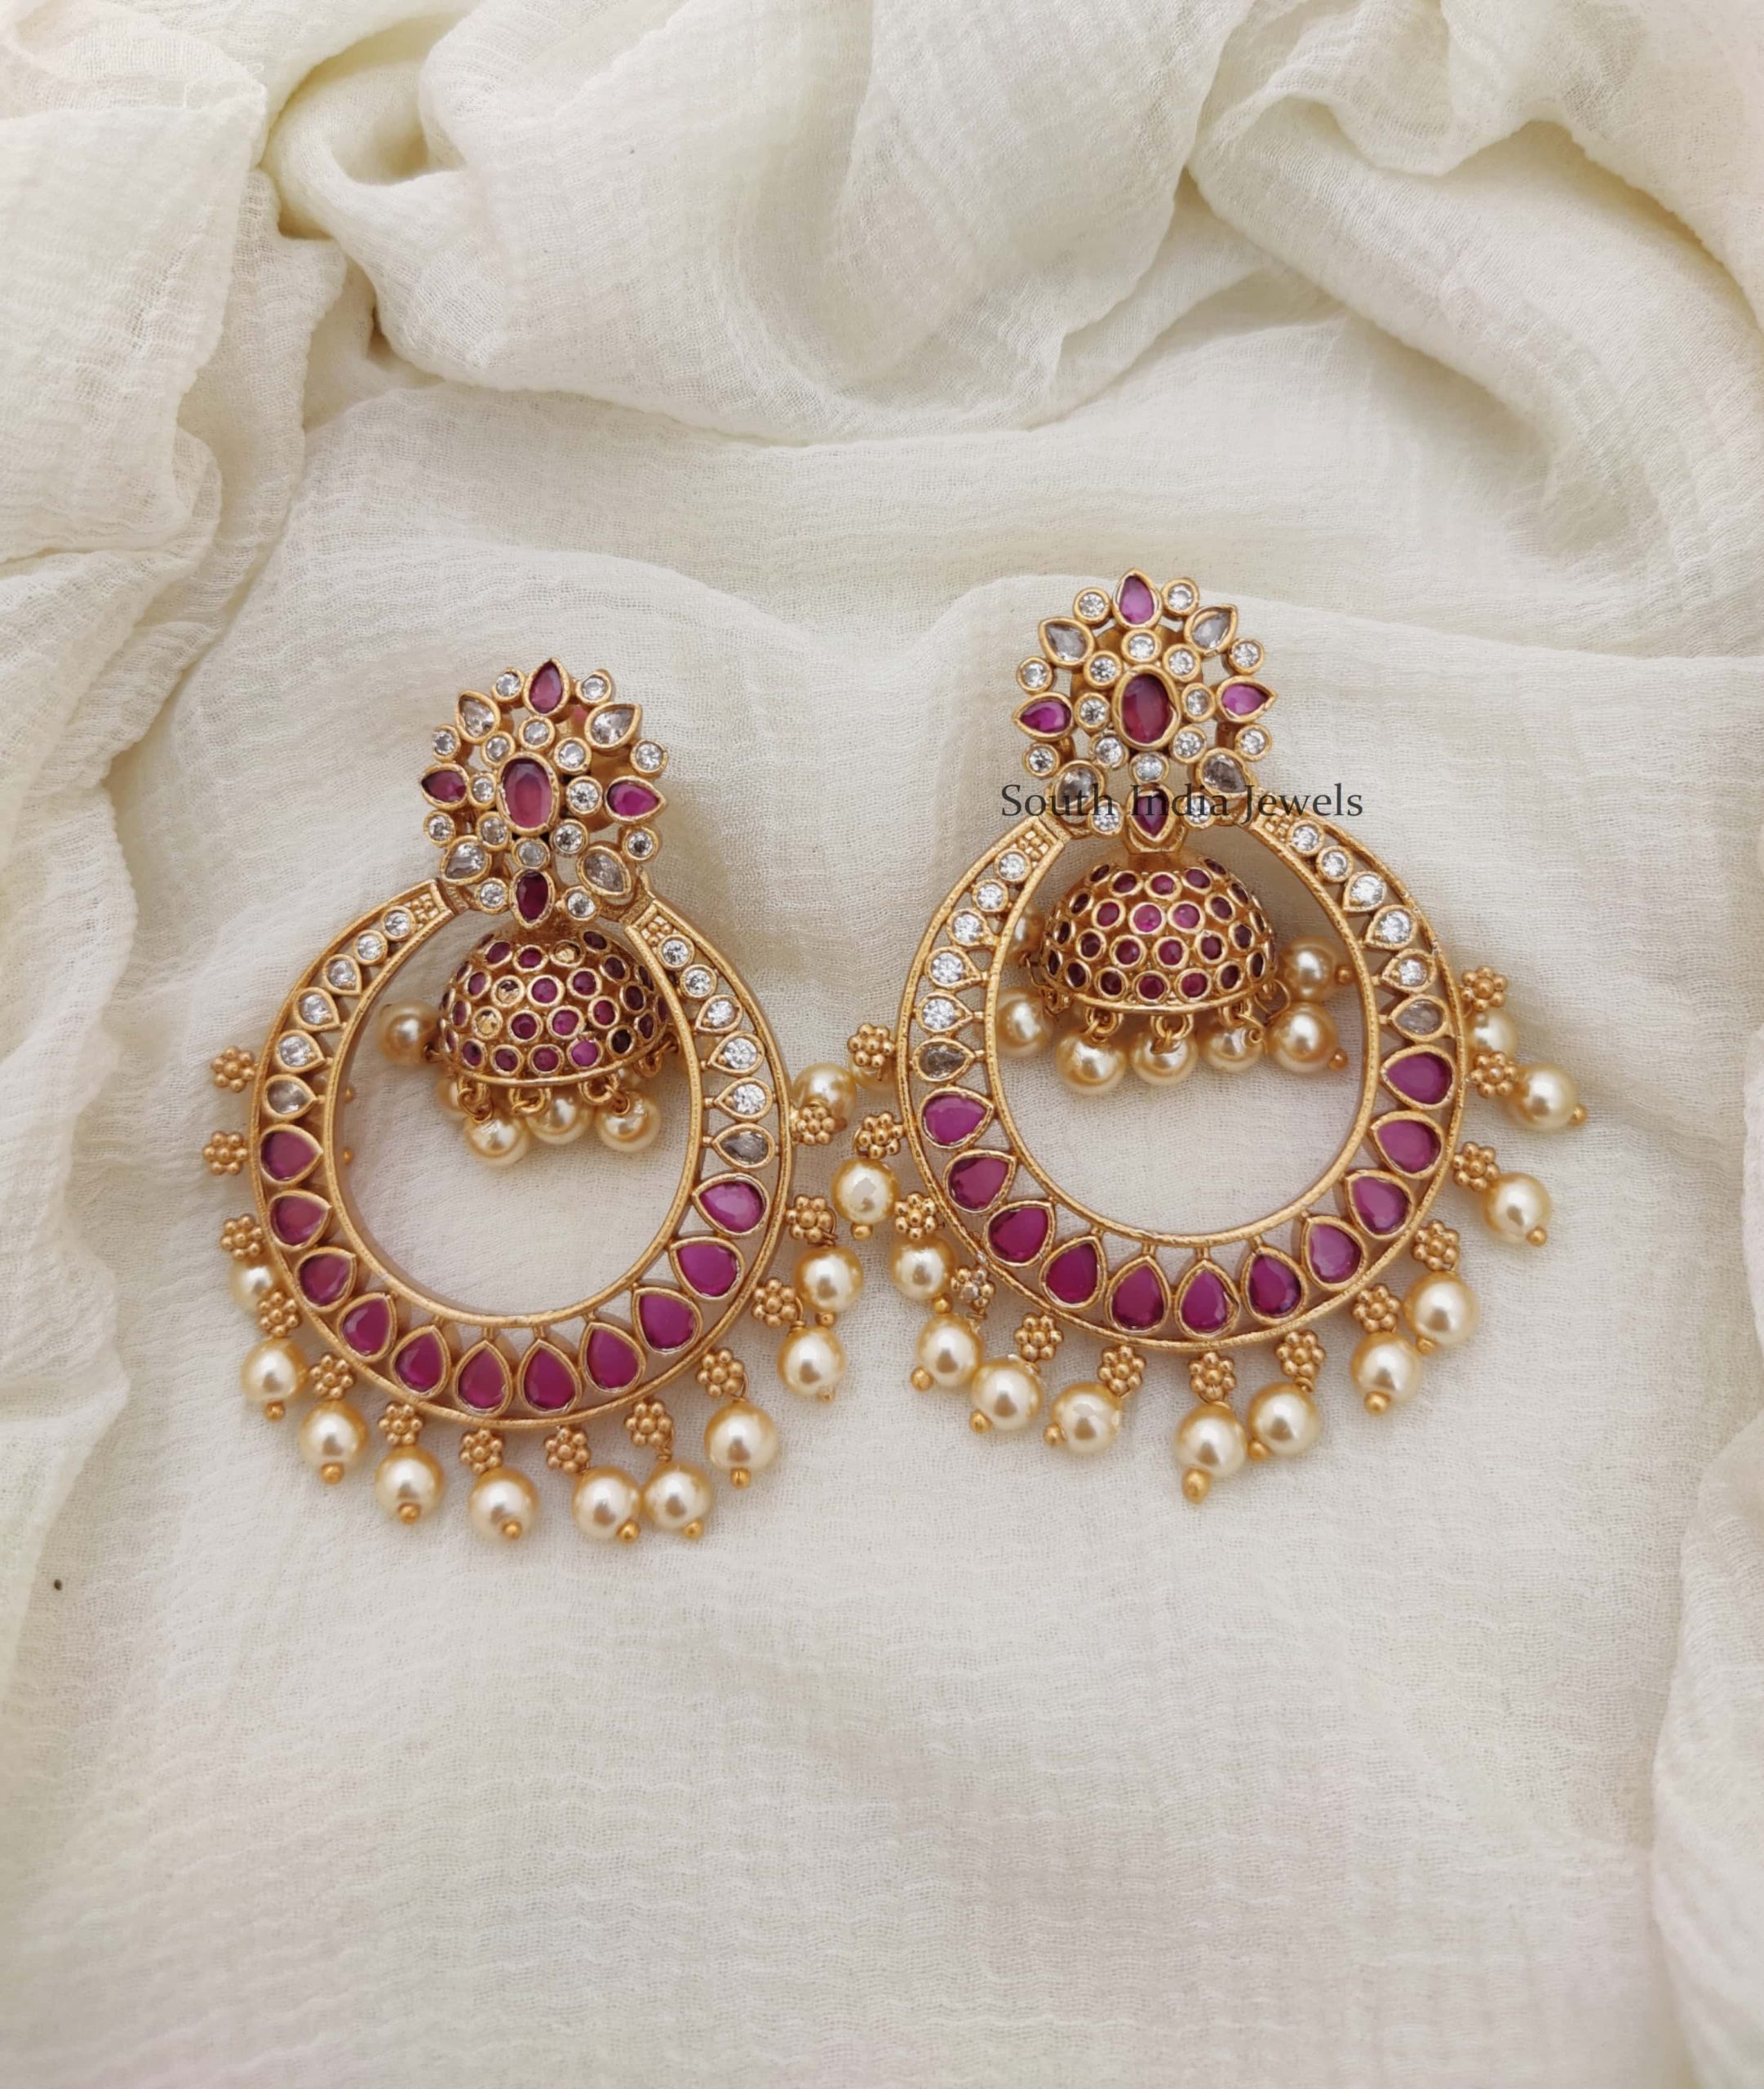 New Top gold jhumka earrings collection // variety gold earrings with  weight - YouTube